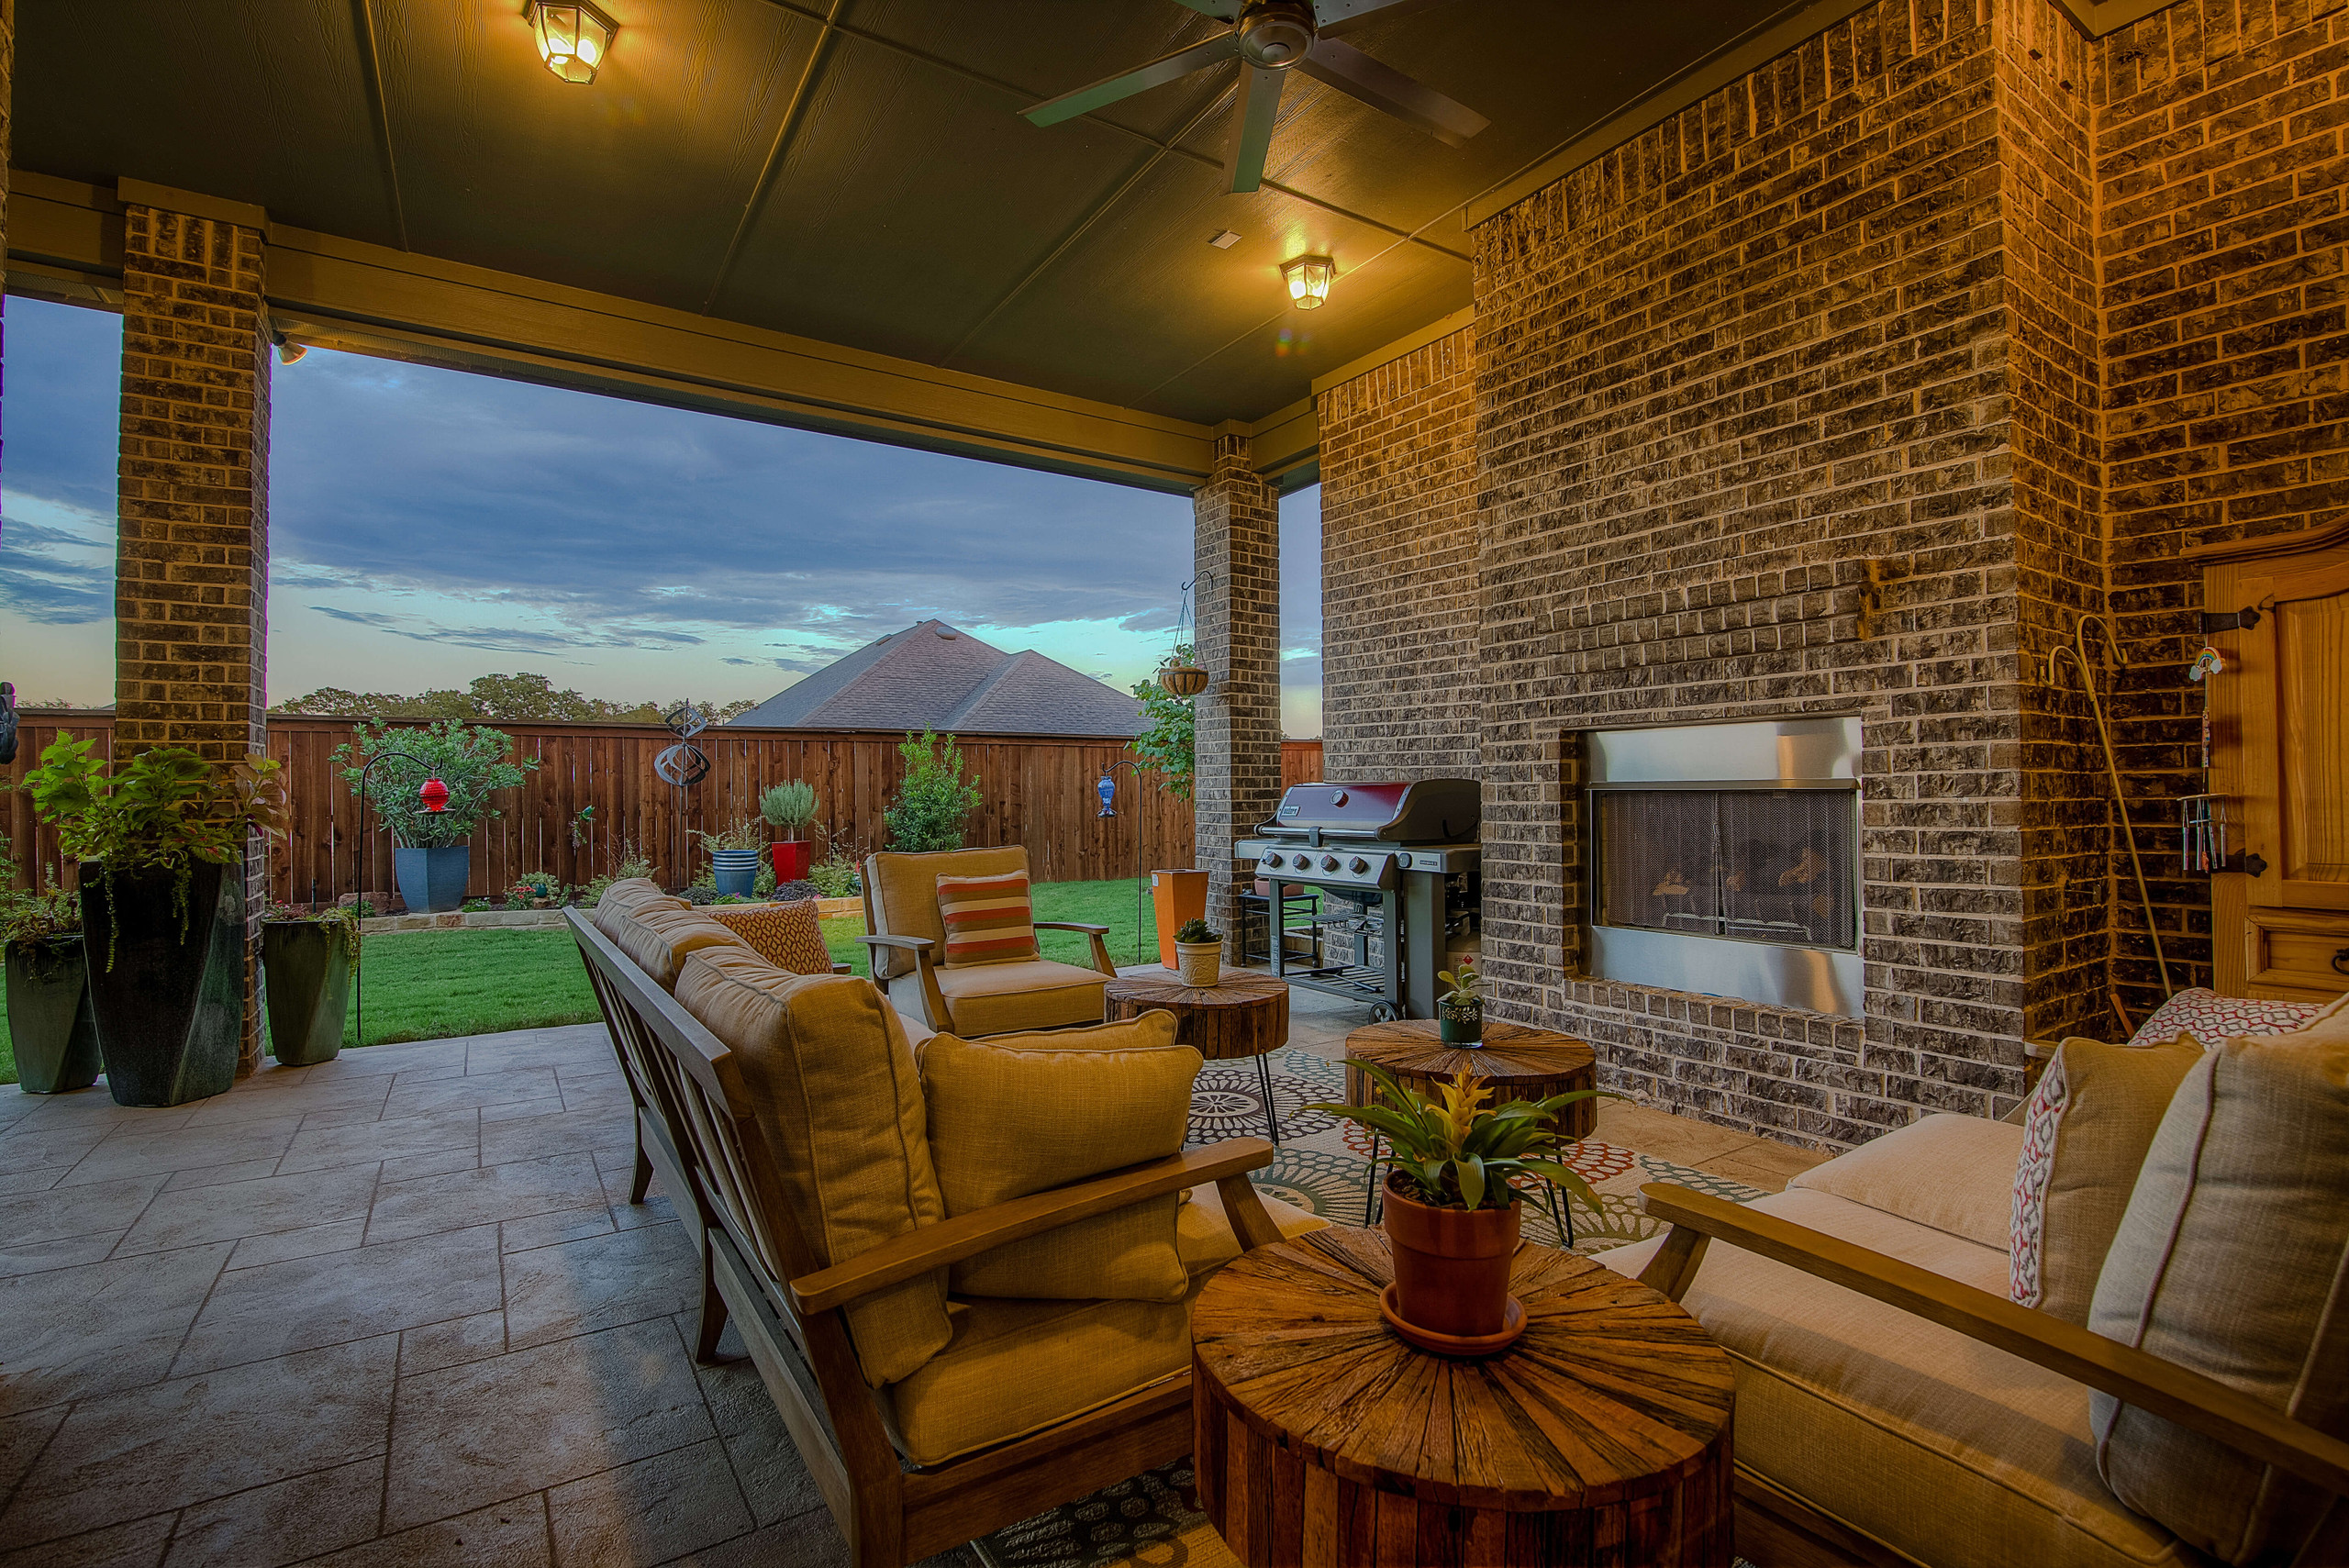 Inviting patio space with grill area and fireplace